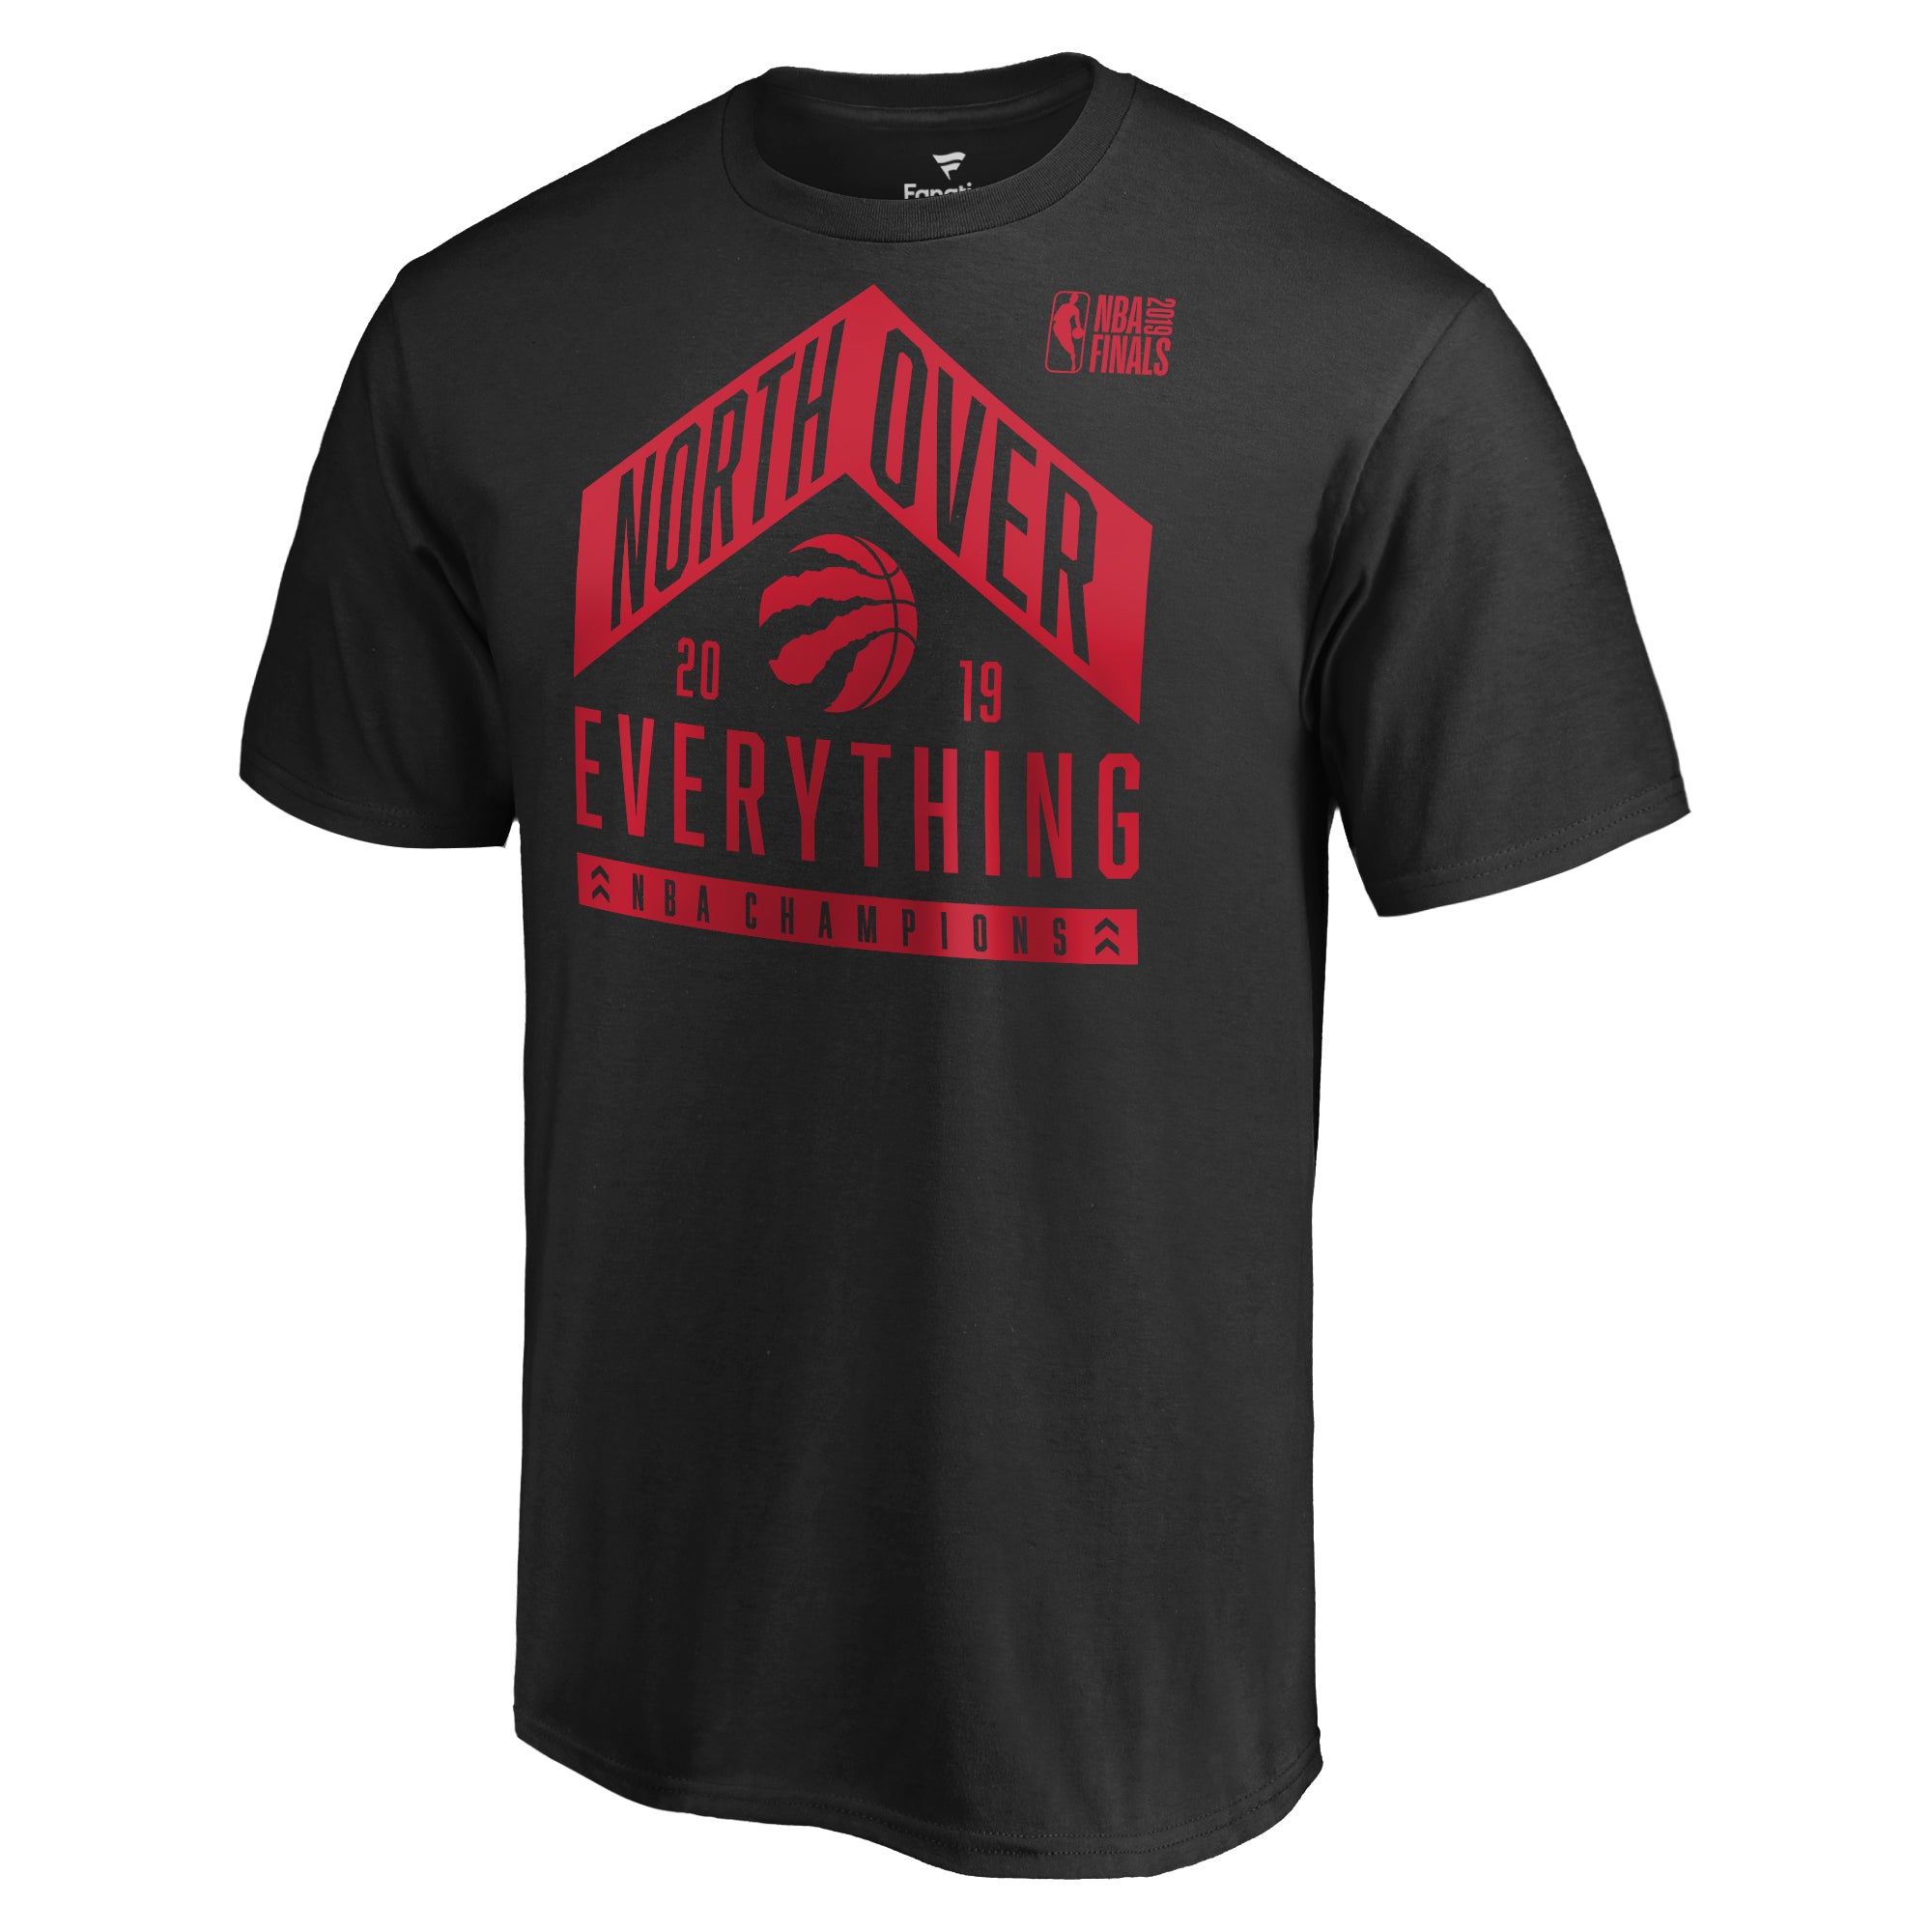 north over everything t shirt